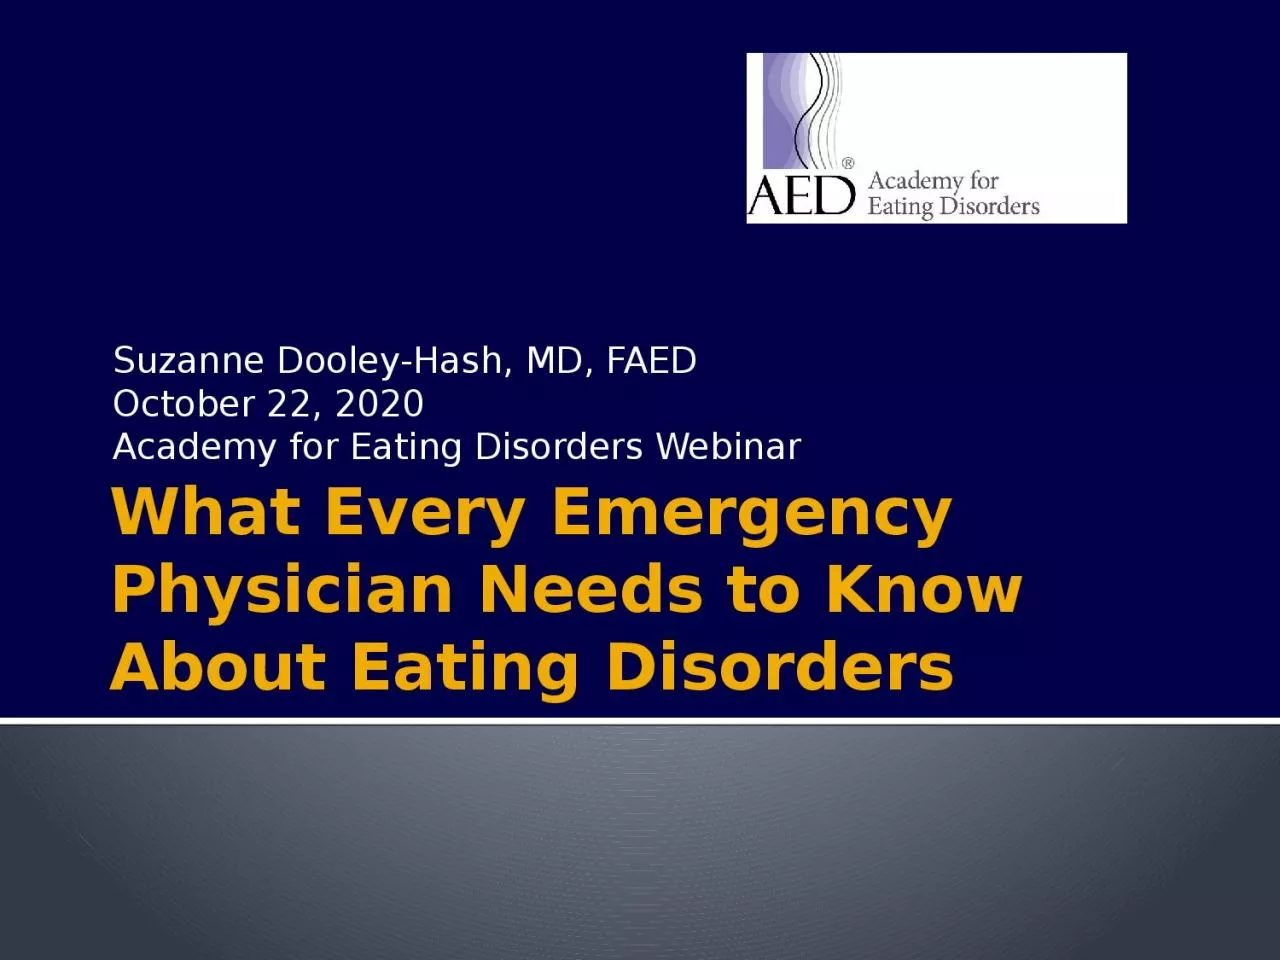 What Every Emergency Physician Needs to Know About Eating Disorders